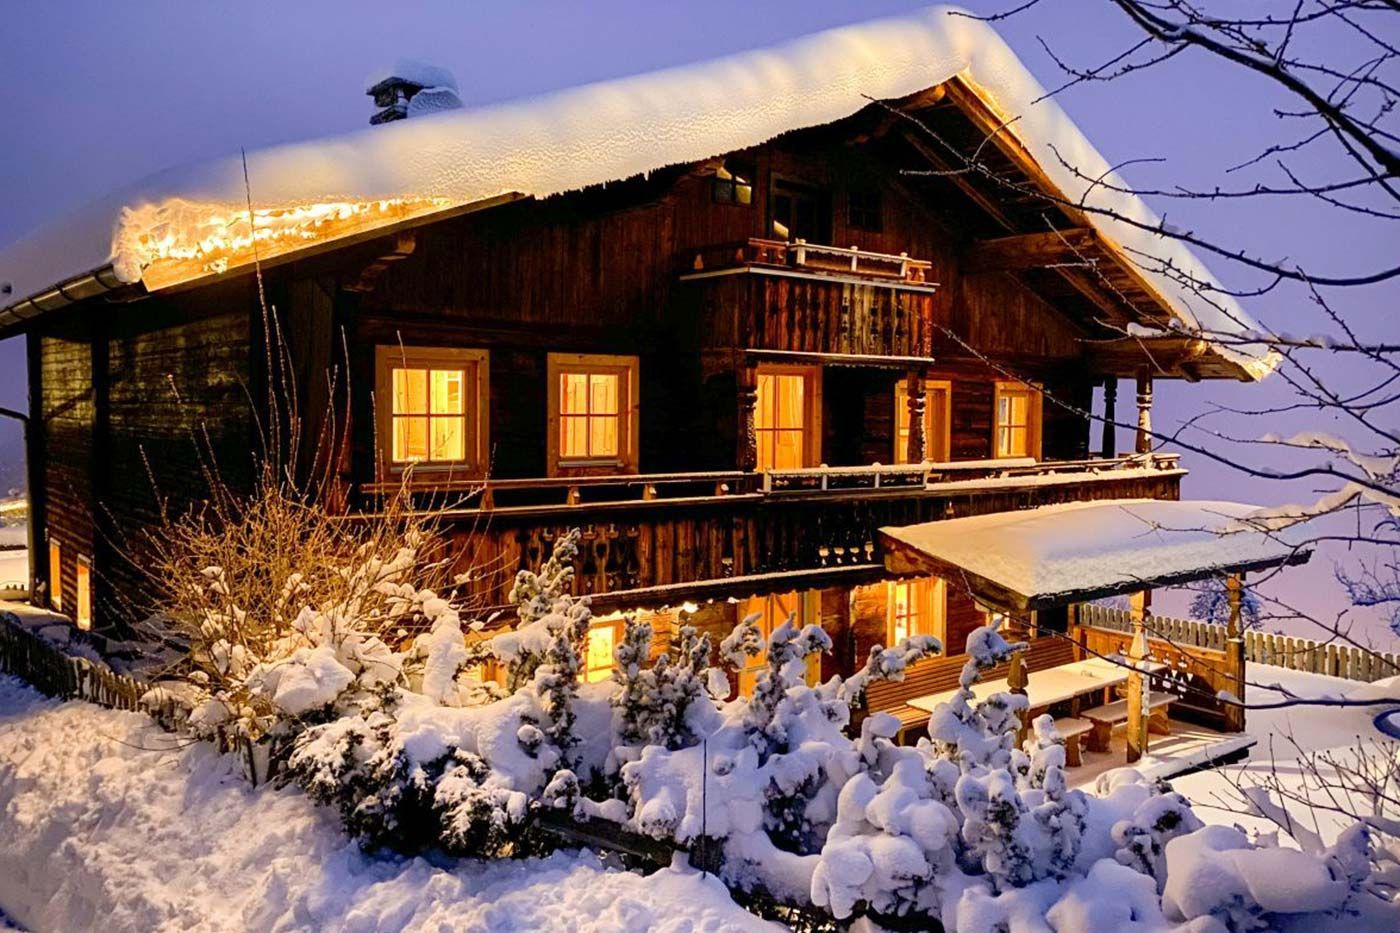 Traditional, rustic and cozy - the Premium Chalet Zirbe.